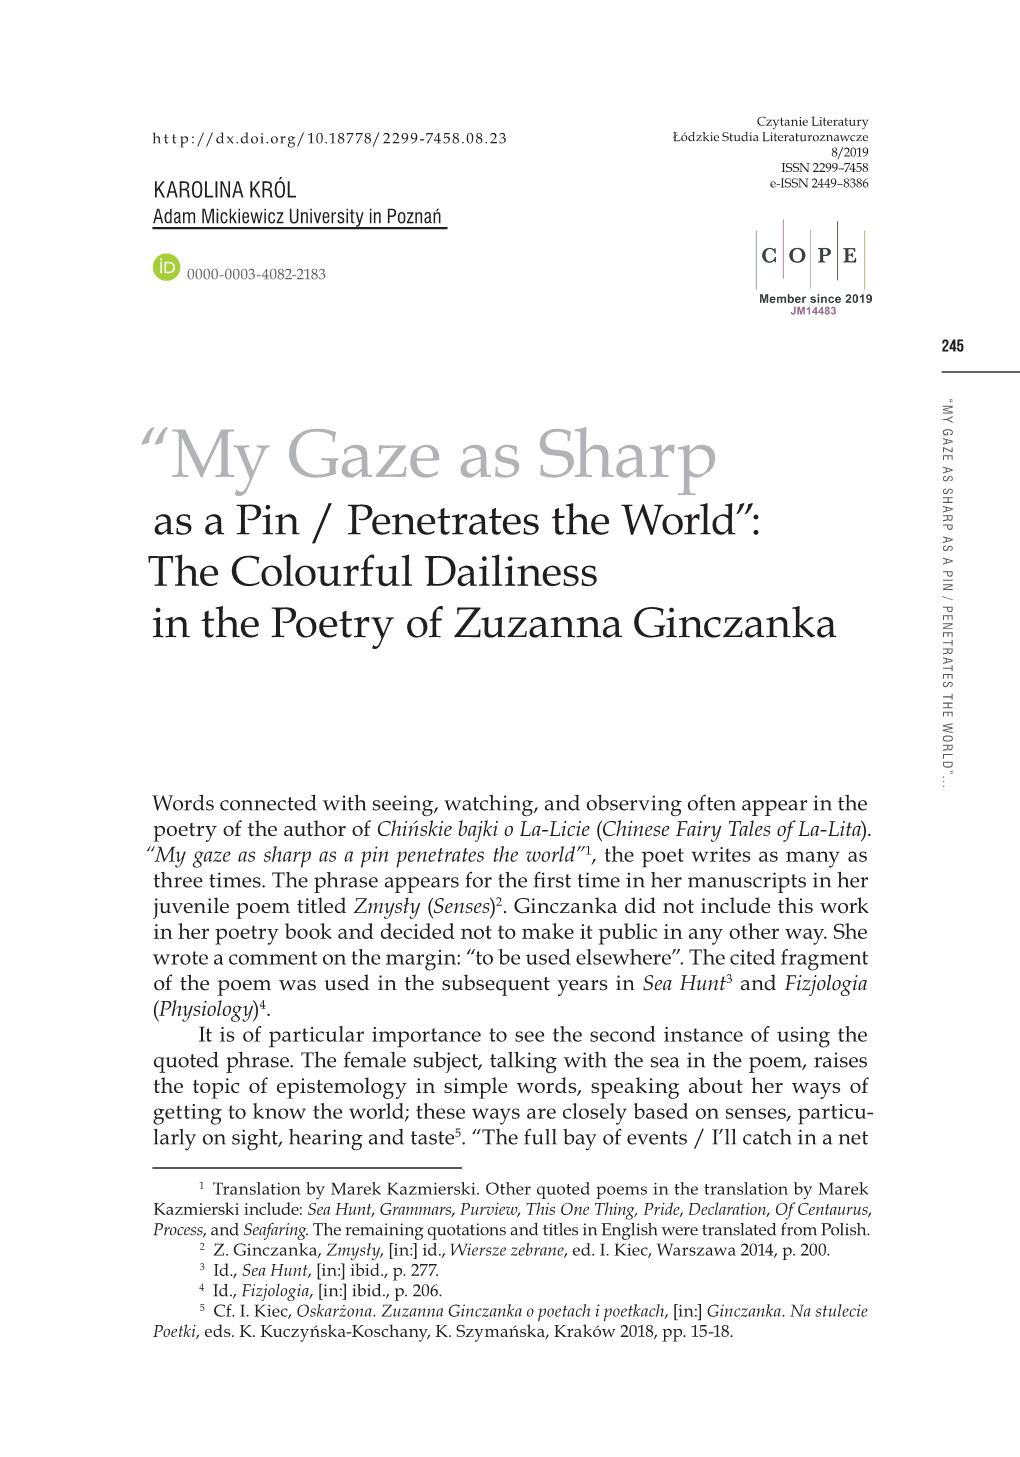 The Colourful Dailiness in the Poetry of Zuzanna Ginczanka